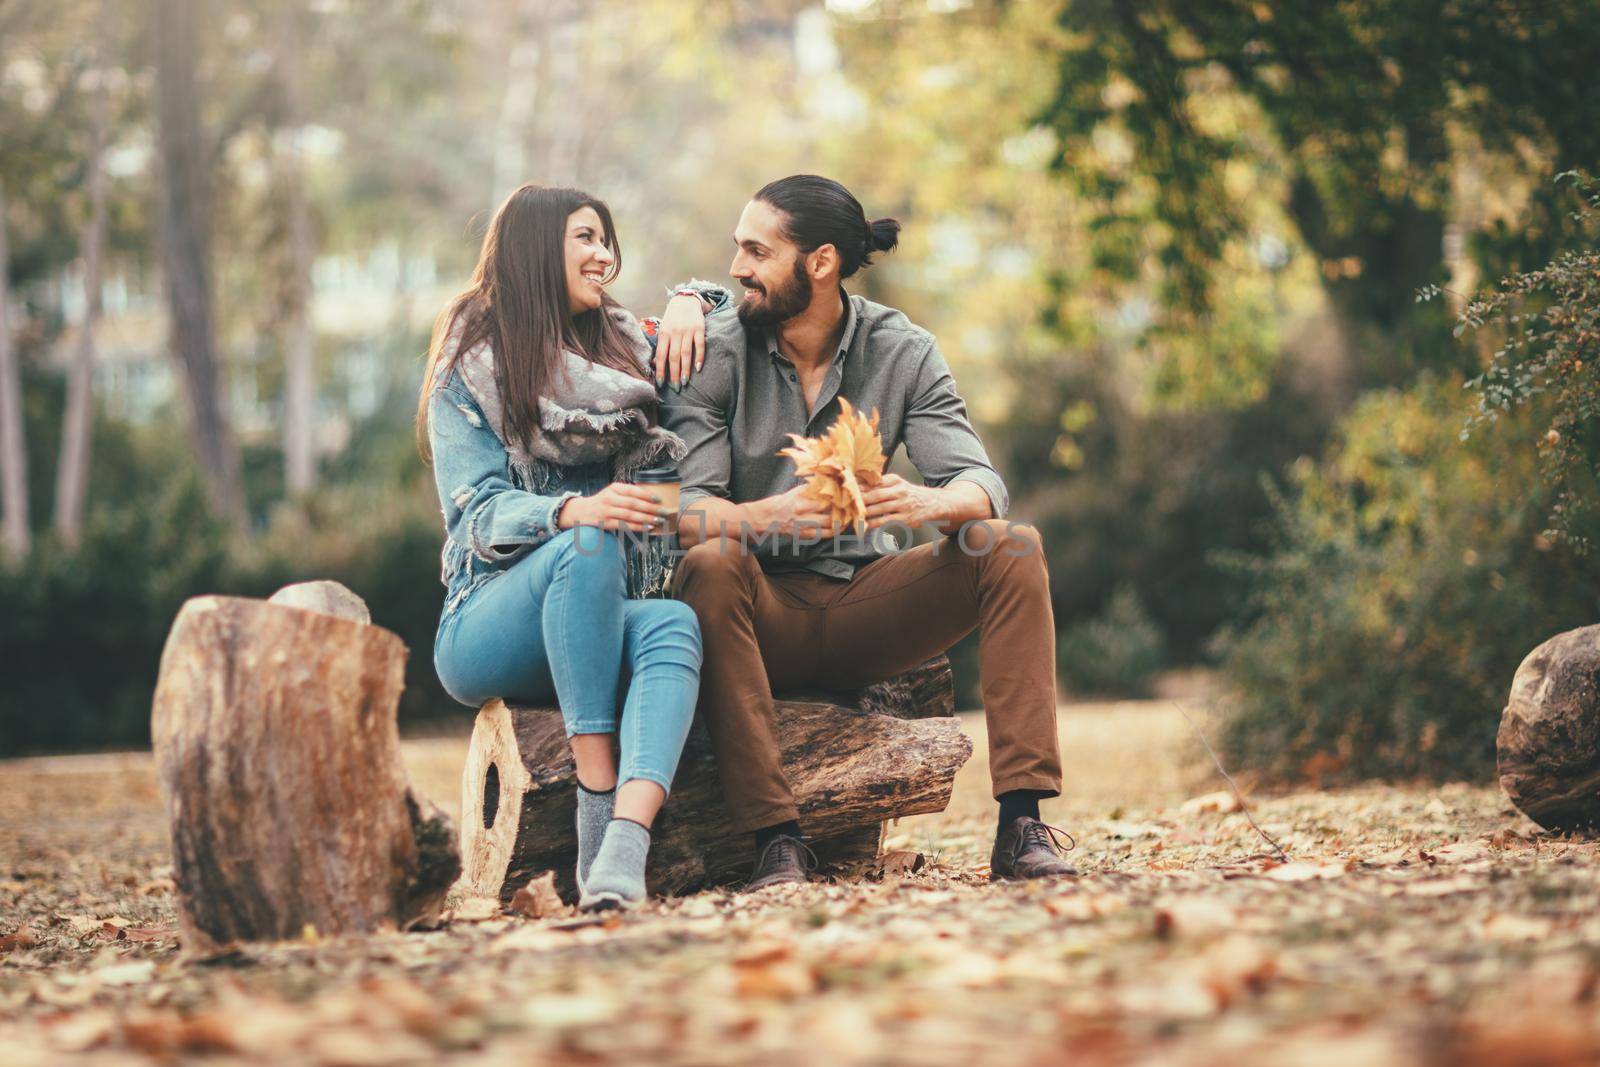 Beautiful smiling couple enjoying in sunny city park in autumn colors looking each other. They are embracing and holding yellow leaves.